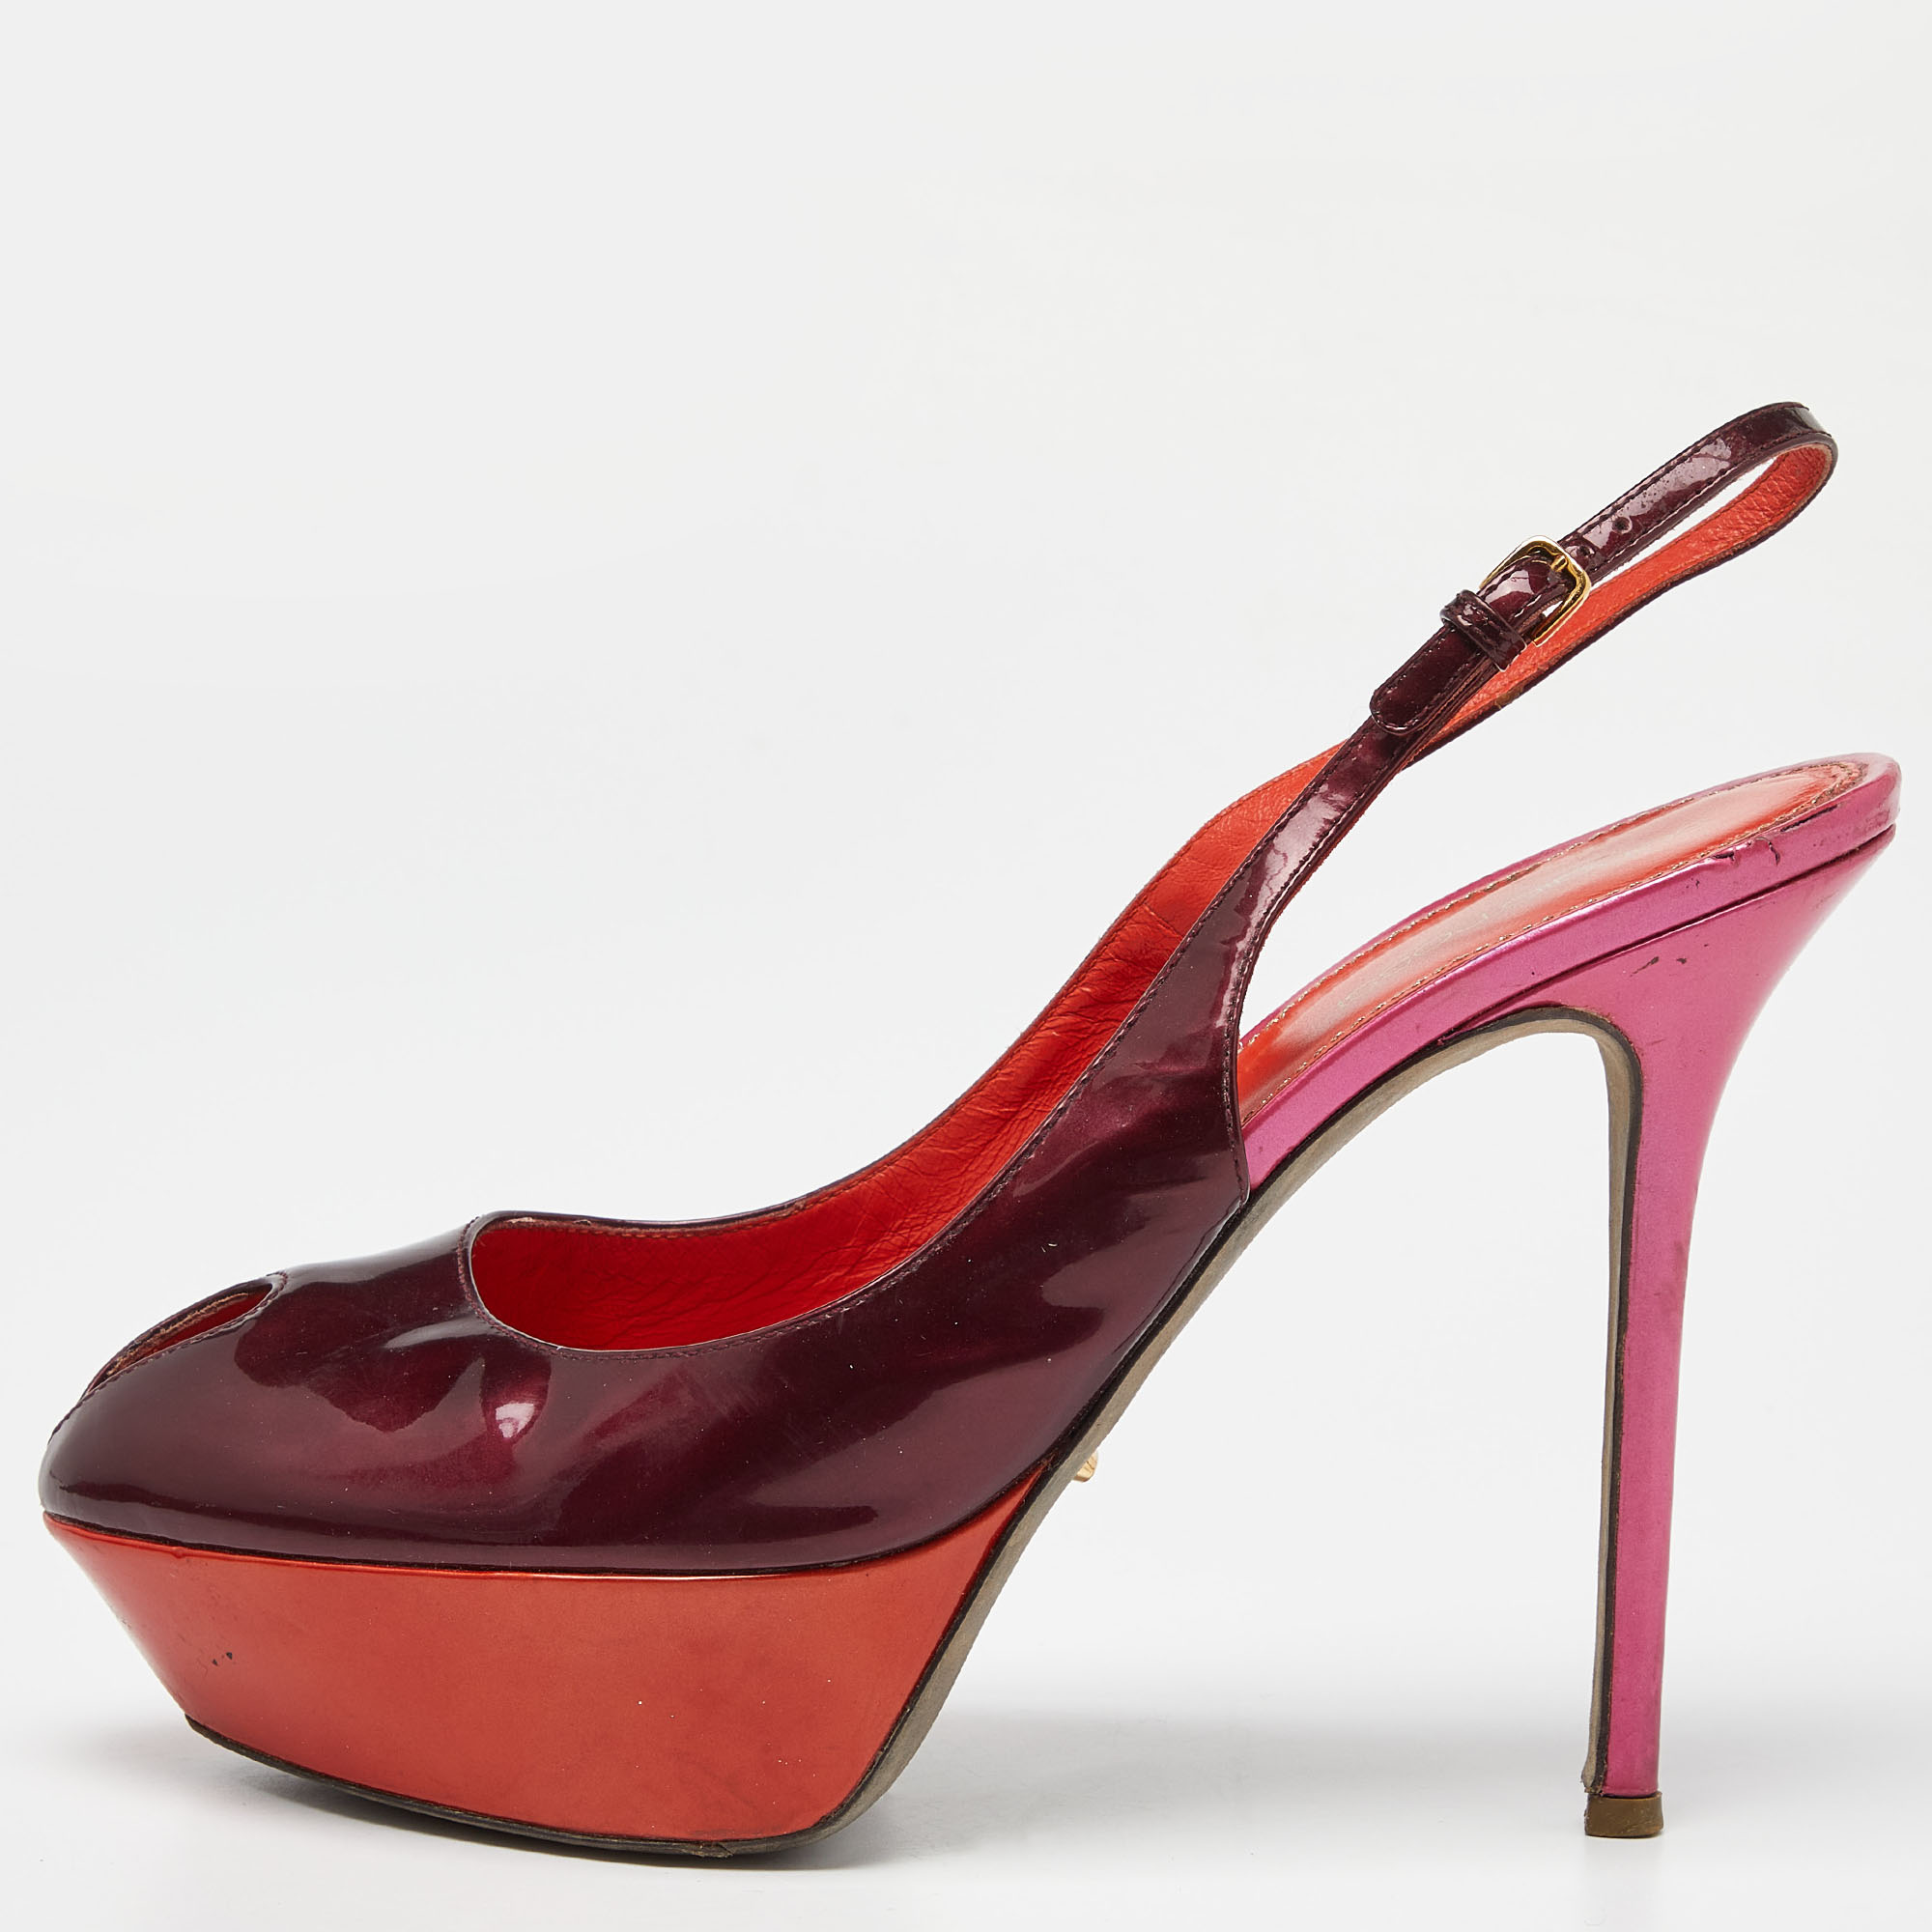 Pre-owned Sergio Rossi Burgundy/red Patent Leather Cachet Slingback Pumps Size 39